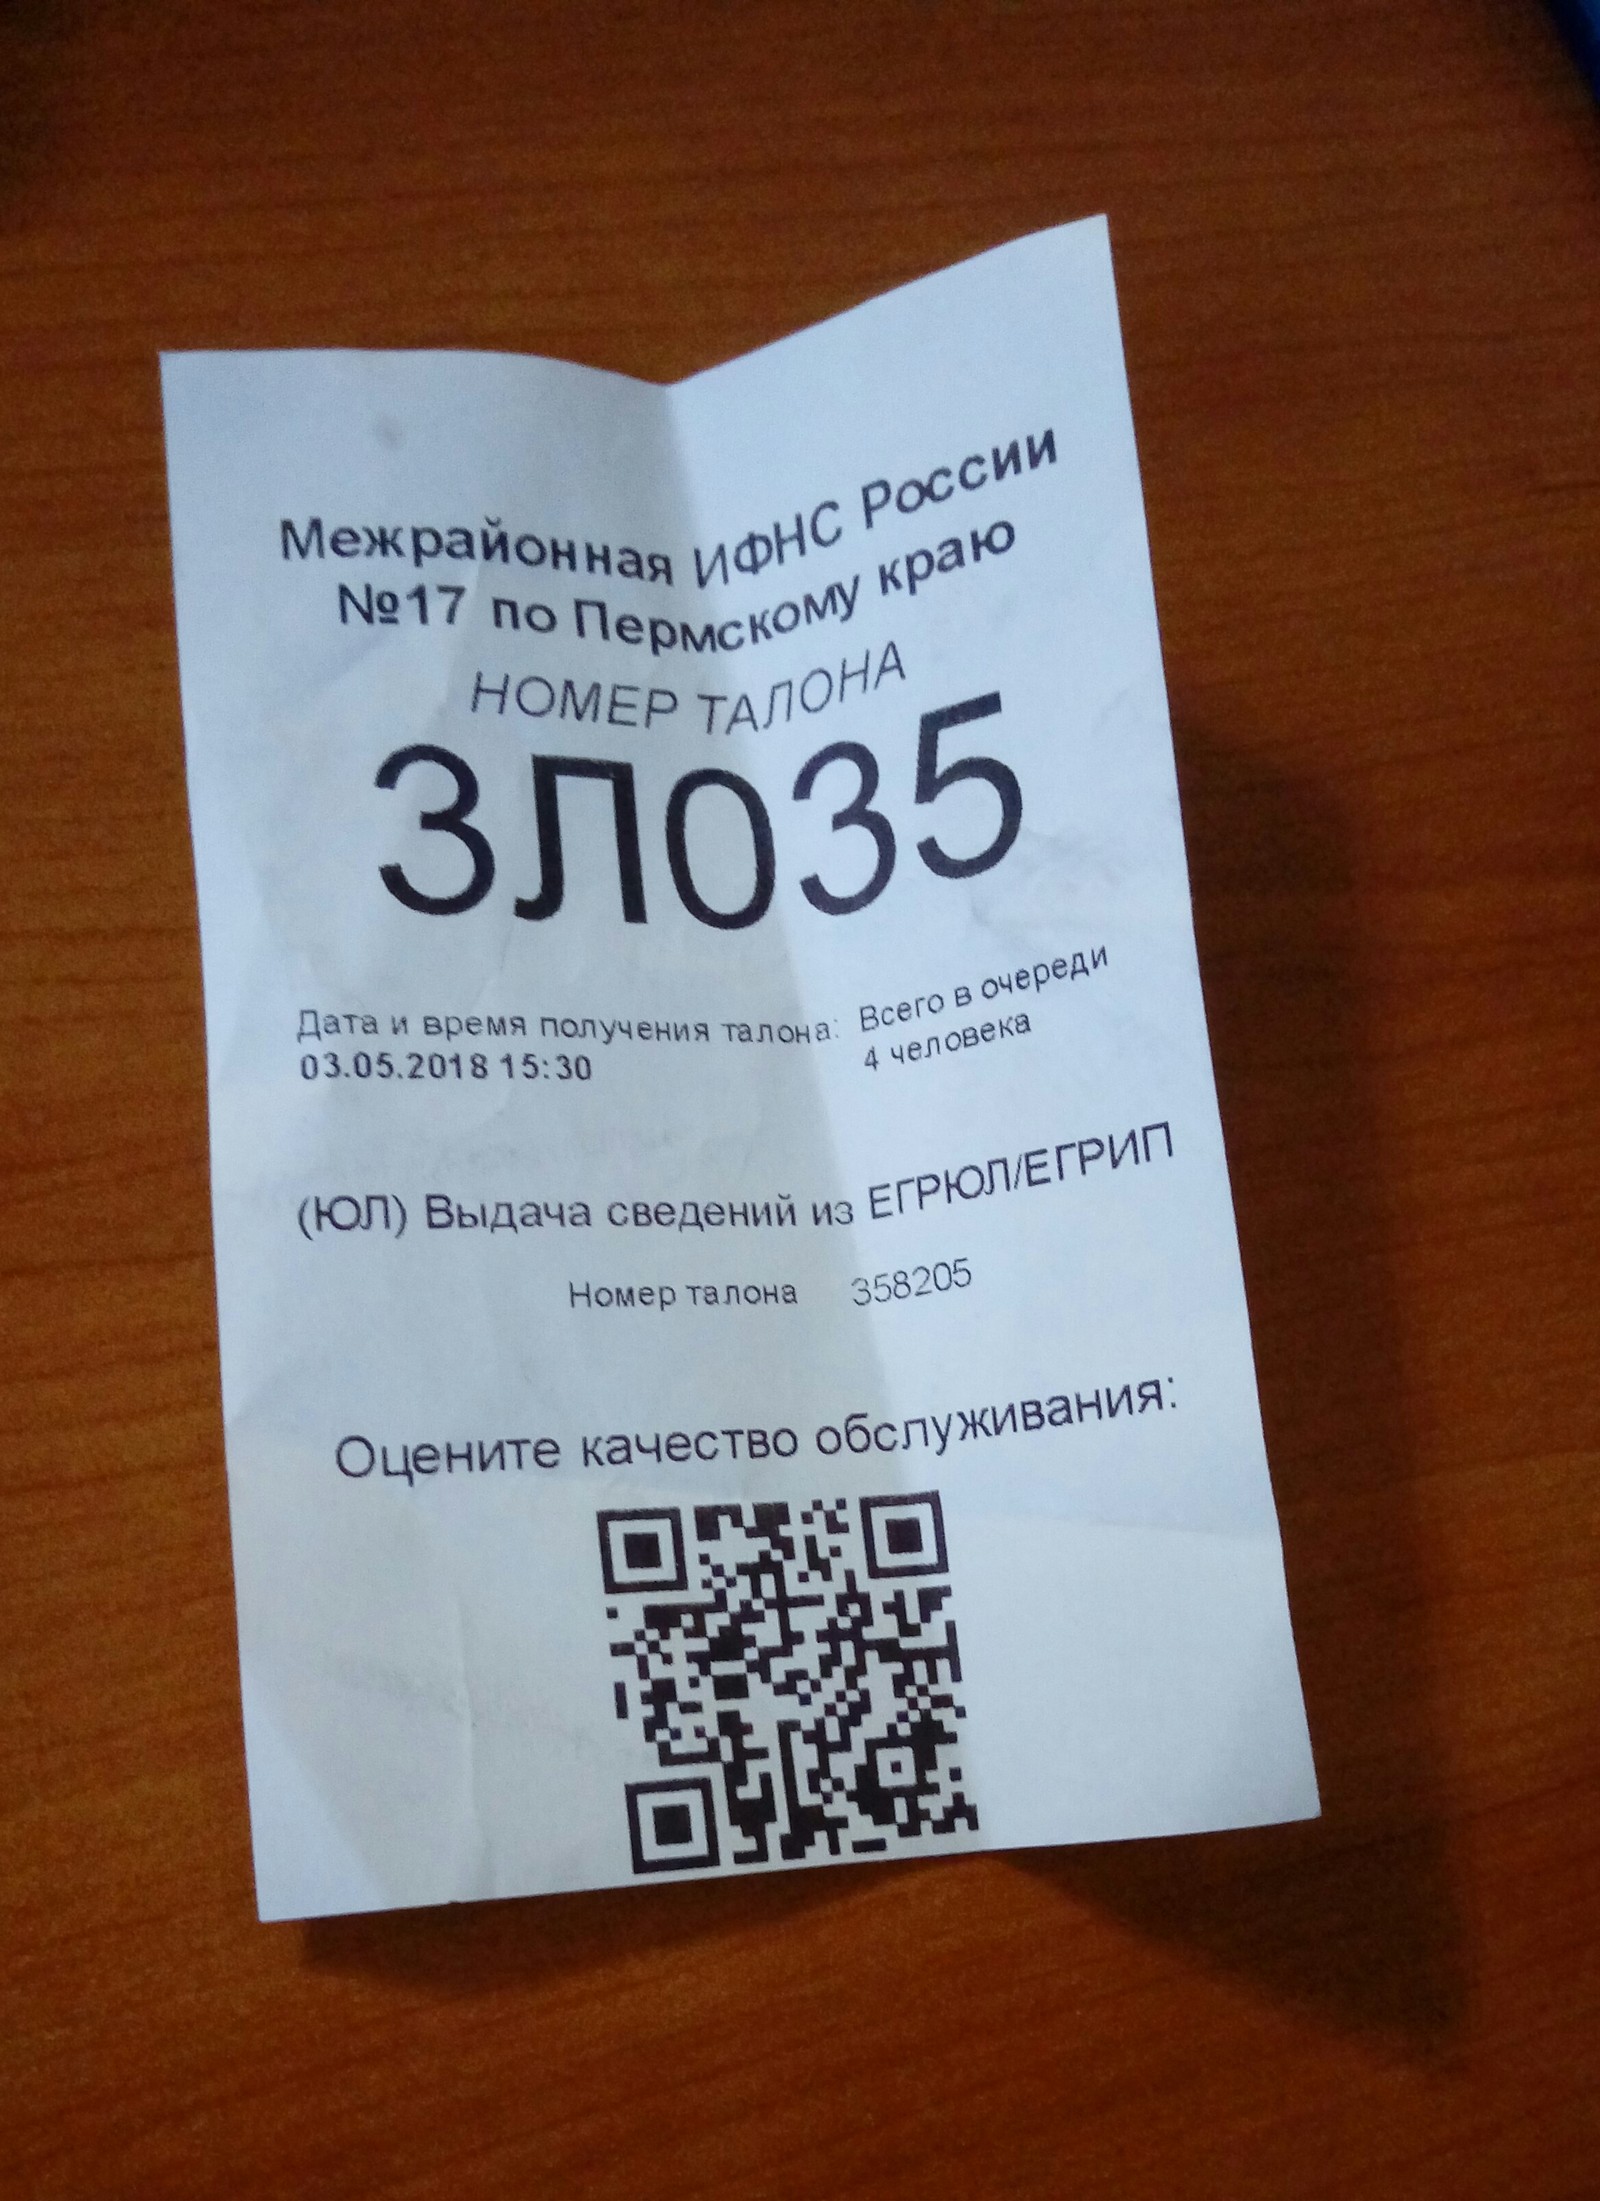 Suitable ticket number in the tax office - My, Tax office, Ifns, Evil, Coincidence, Permian, FTS